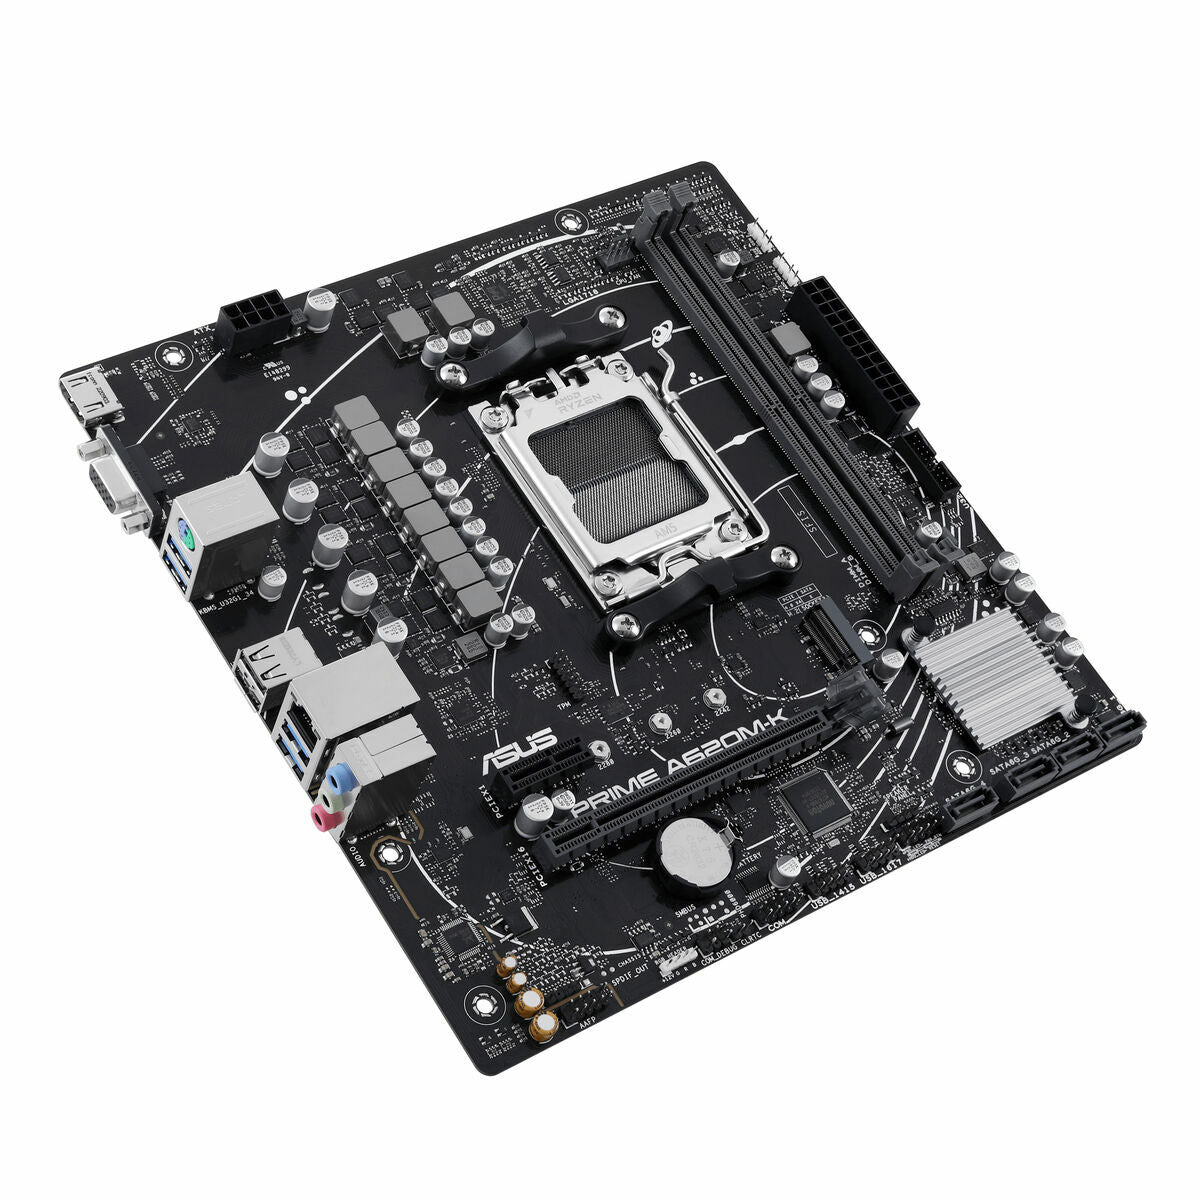 Motherboard Asus A620M-K AMD AM5 AMD, Asus, Computing, Components, motherboard-asus-a620m-k-amd-am5-amd, Brand_Asus, category-reference-2609, category-reference-2803, category-reference-2804, category-reference-t-19685, category-reference-t-19912, category-reference-t-21360, computers / components, Condition_NEW, Price_100 - 200, Teleworking, RiotNook